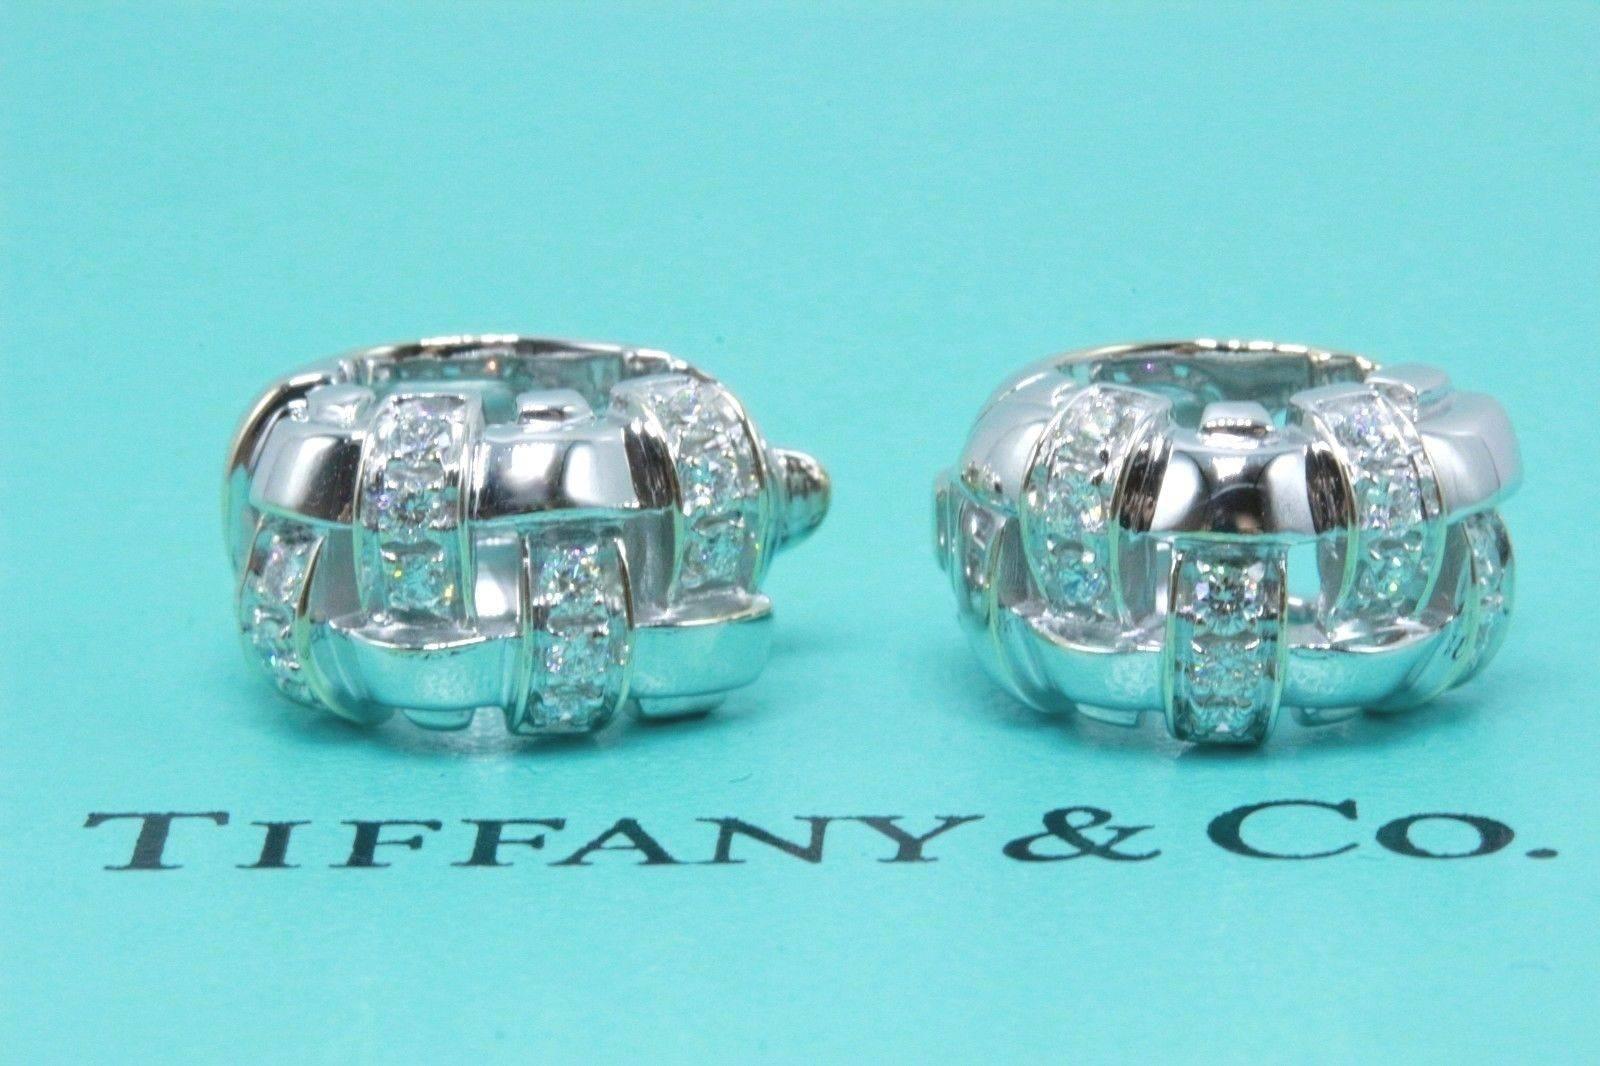 Tiffany & Co.
Style: Vannerie Basket Weave Diamond Earrings
Backing:  Paddle backs with Posts
Metal:  18kt White Gold
Dimensions:  15 X 9 X 11.3 MM
Total Carat Weight:  0.48 CTS
Diamond Shape:  Round Brilliant Diamonds
Diamond Color & Clarity:  G -